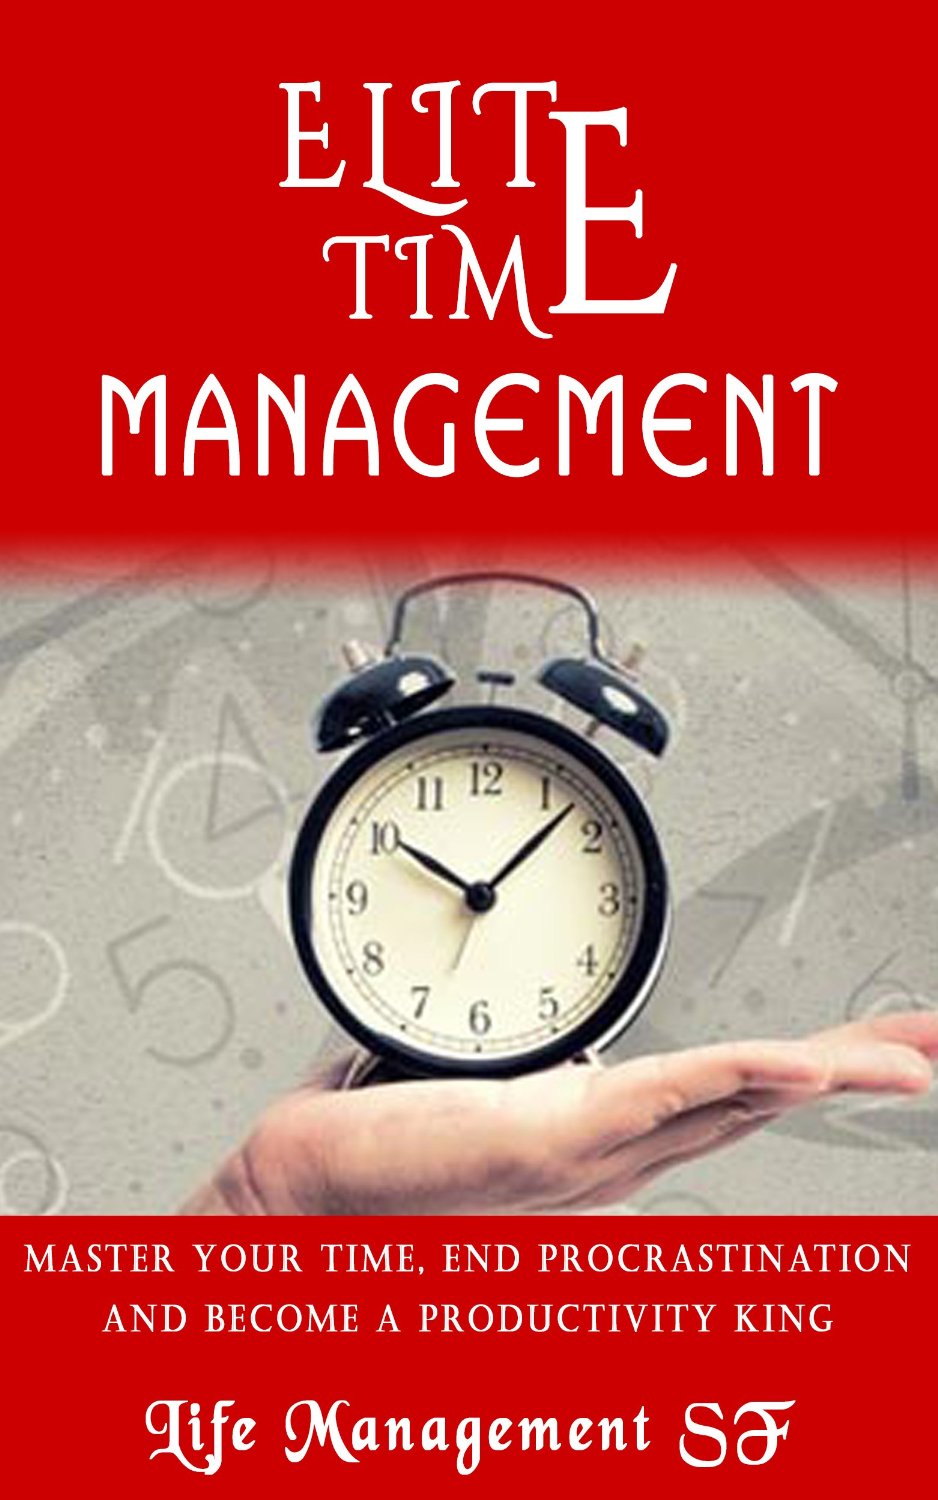 Elite Time Management by Peter Feddox